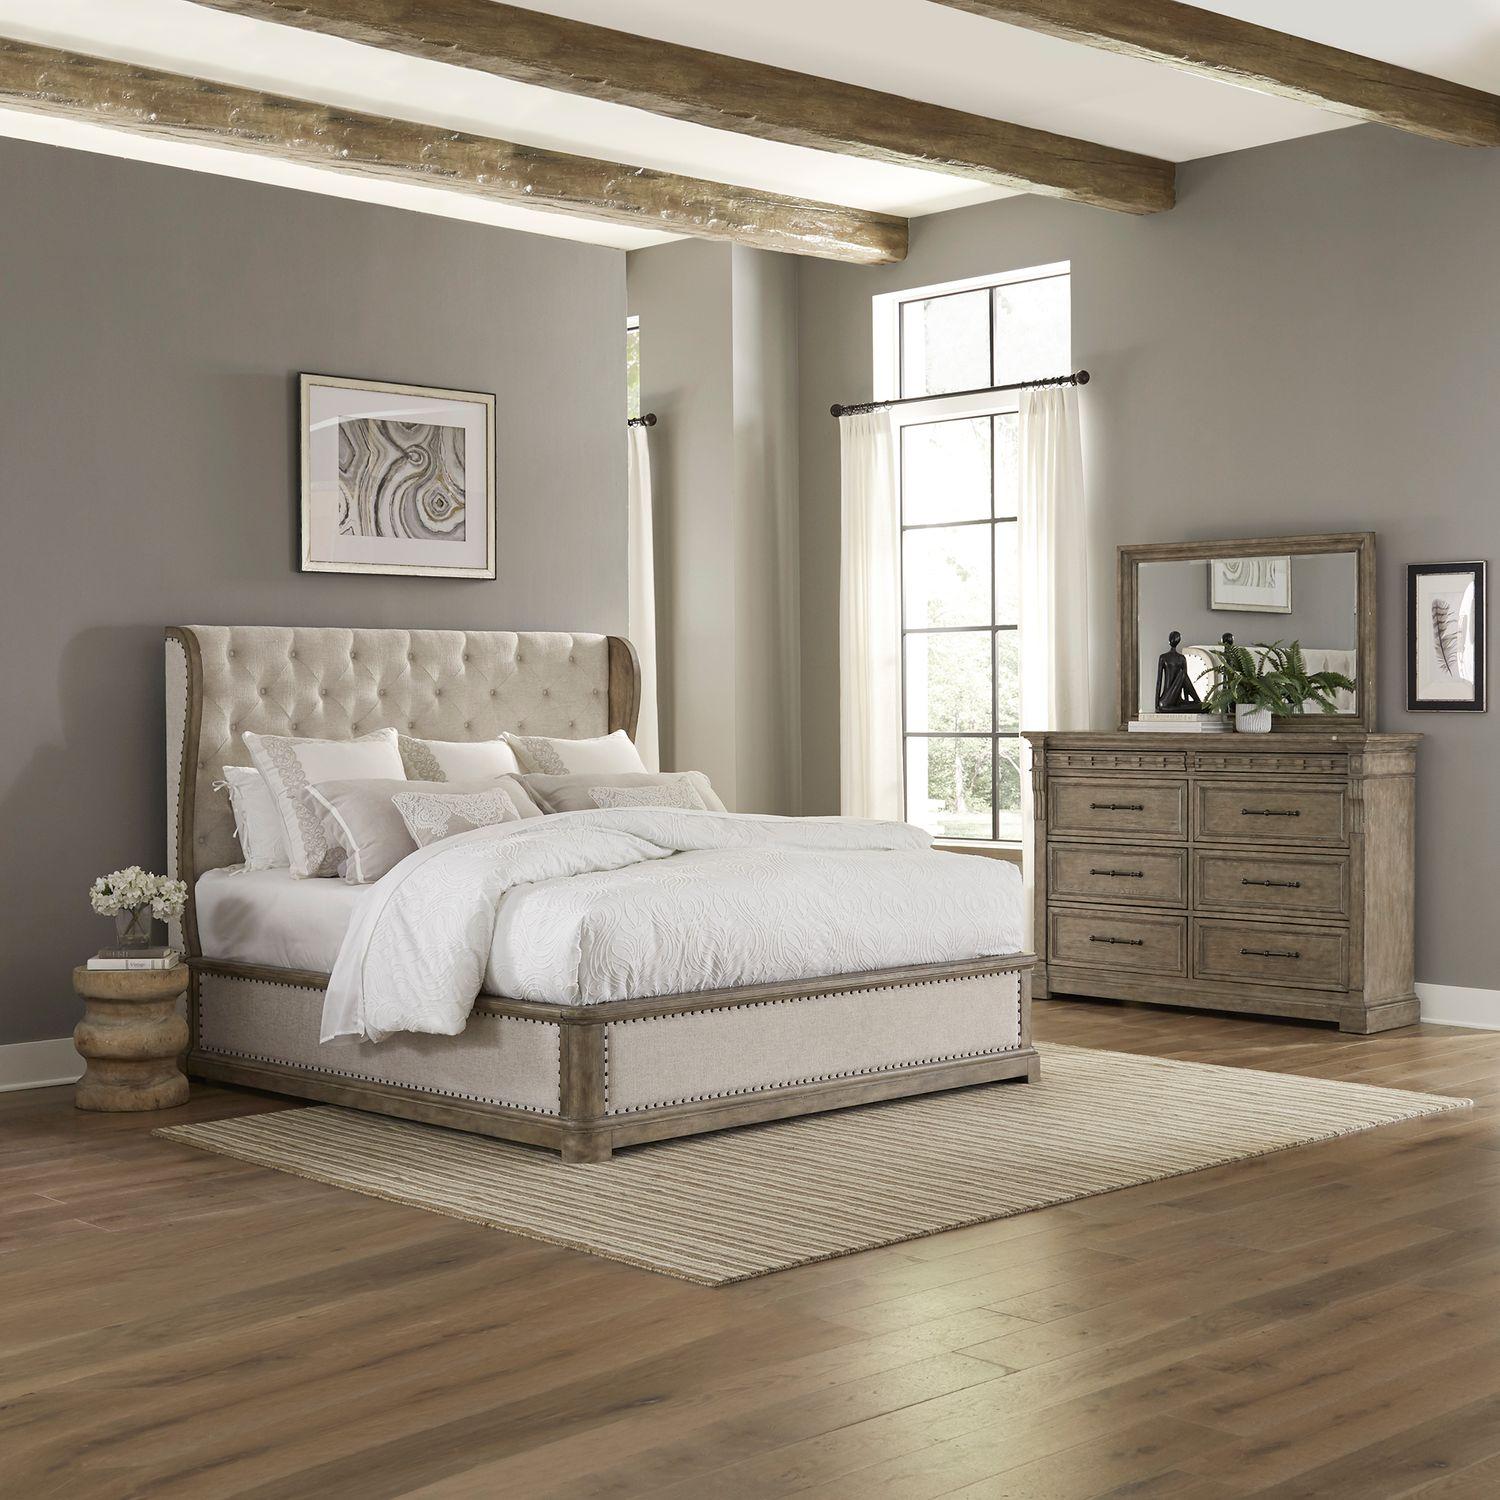 Transitional Platform Bedroom Set Town & Country (711-BR) 711-BR-QSHDM in Taupe Linen